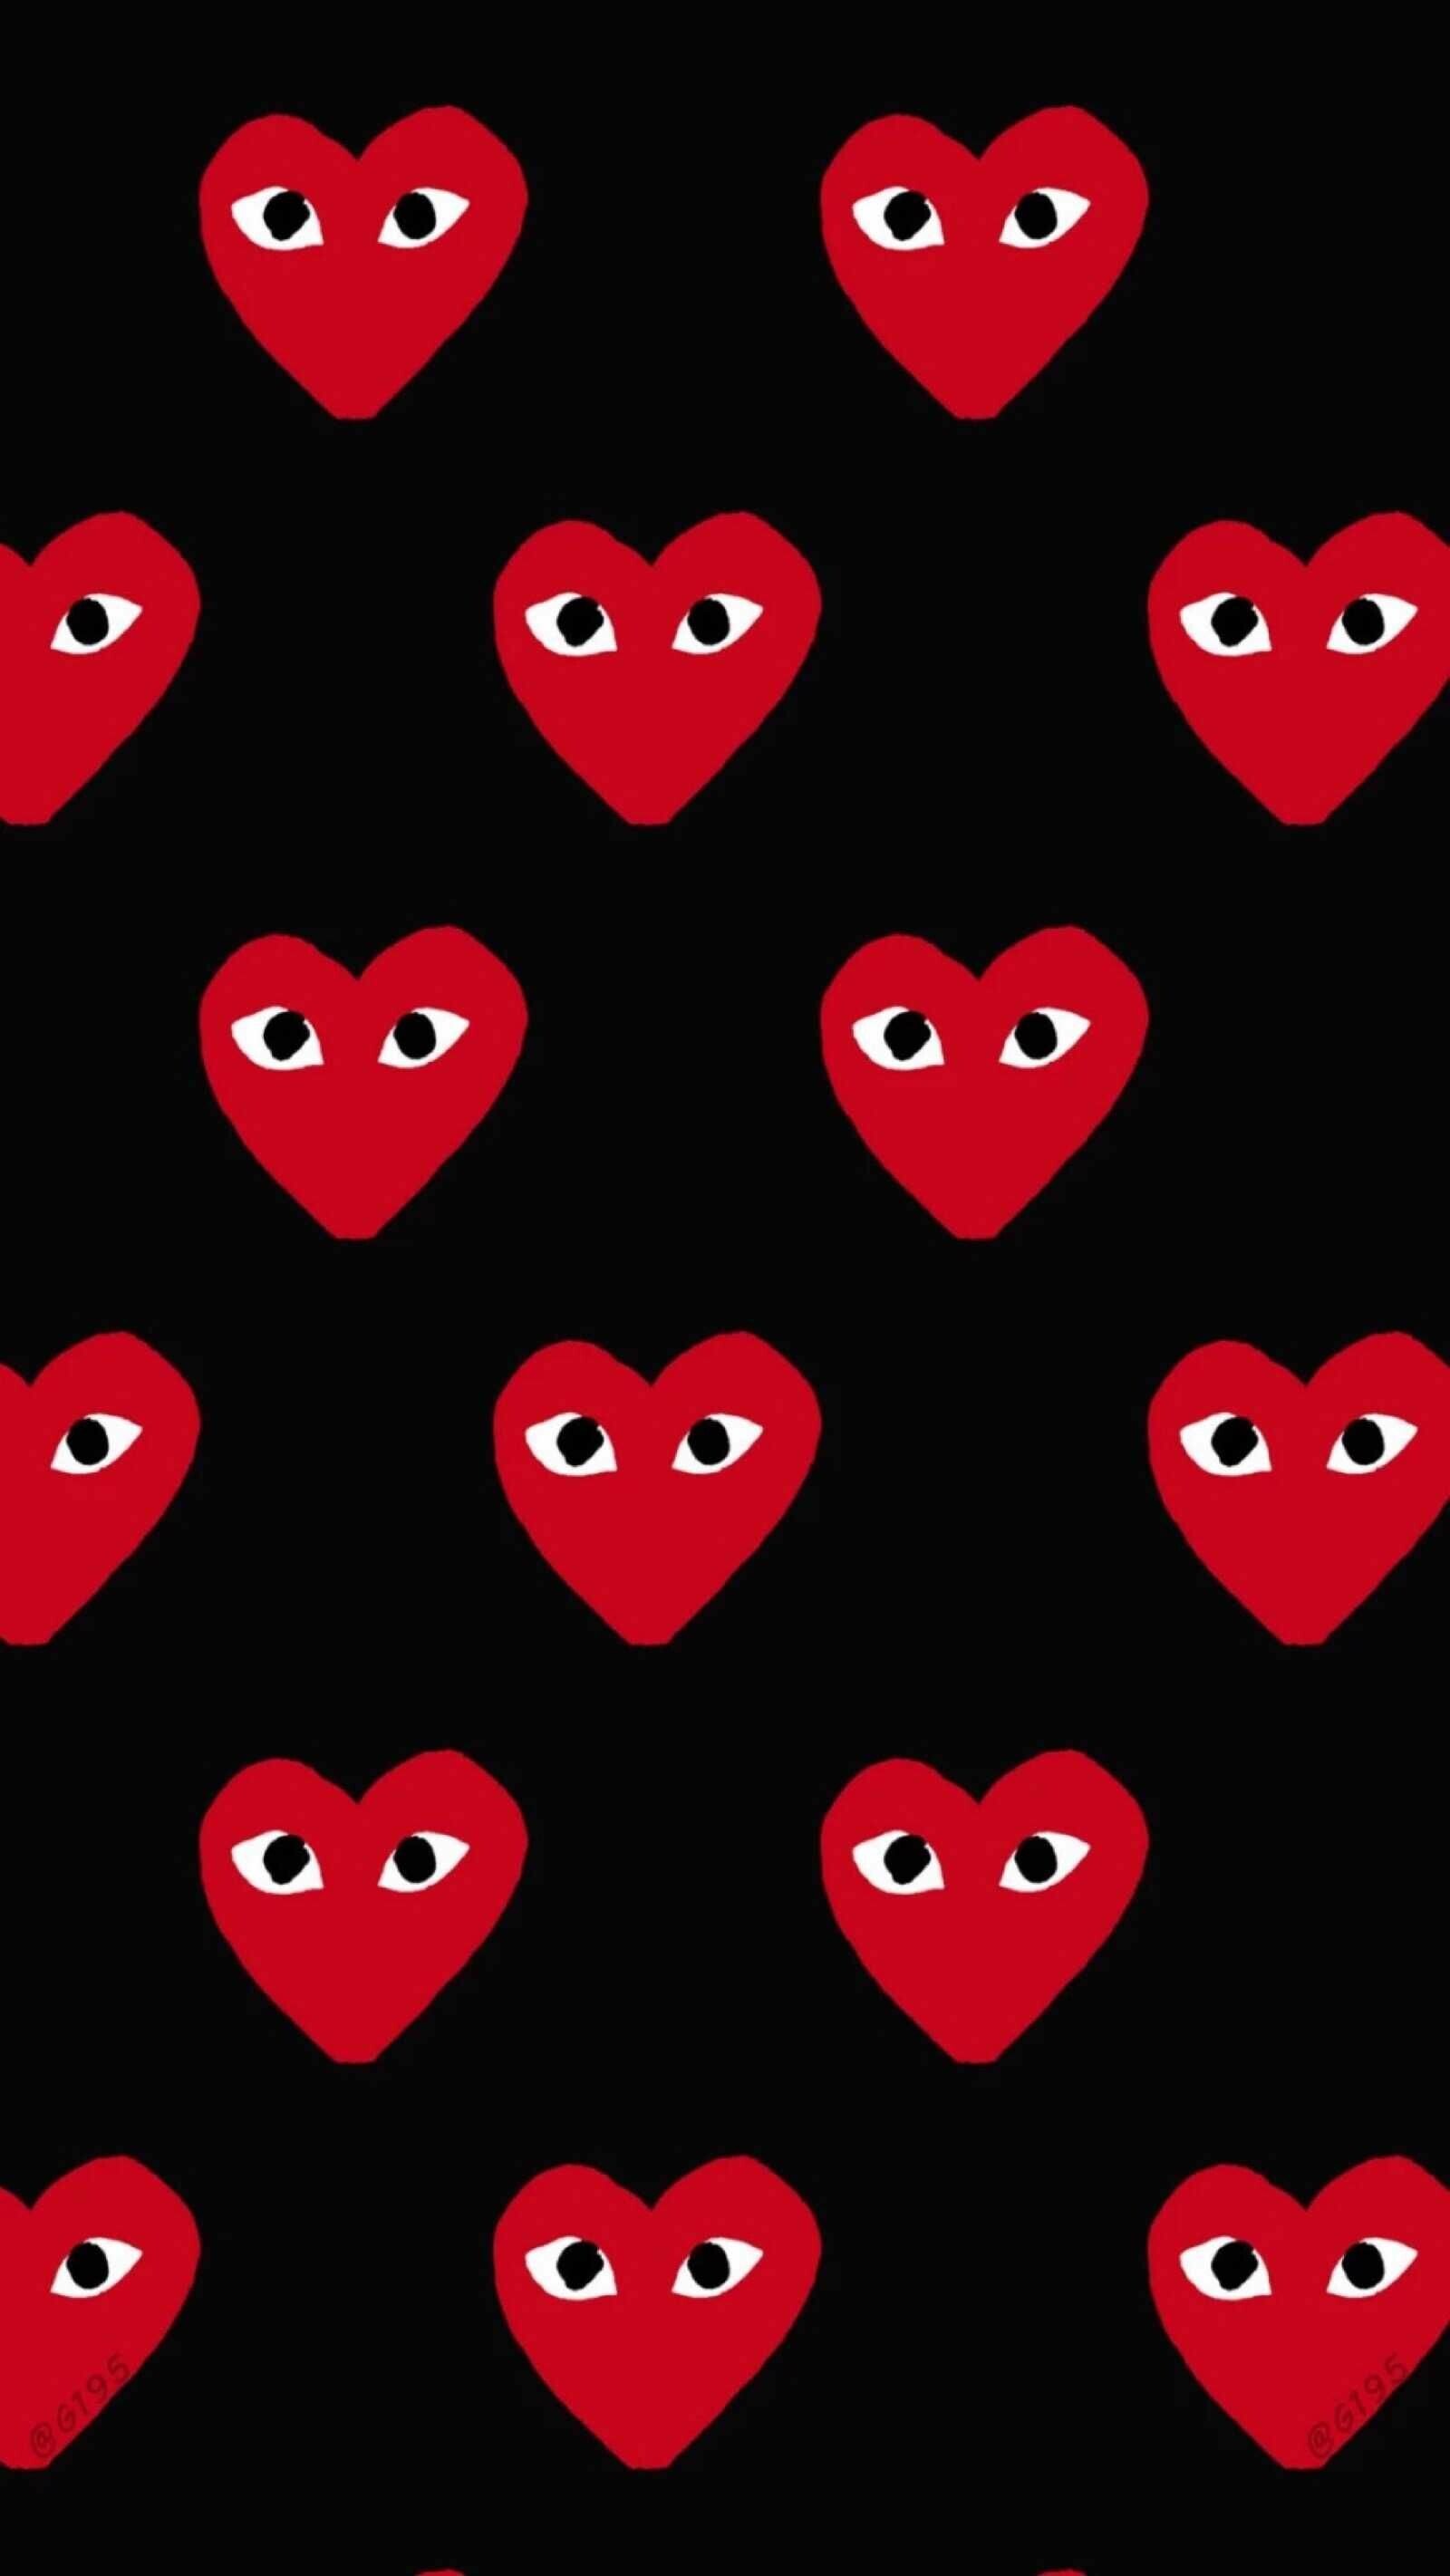 HD wallpaper, Mobile Hd Comme Des Garcons Background Image, 1600X2850 Hd Phone, Hypebeast Feature, Wallpaper Collection, Cdg Patterns, Comme Des Garcons